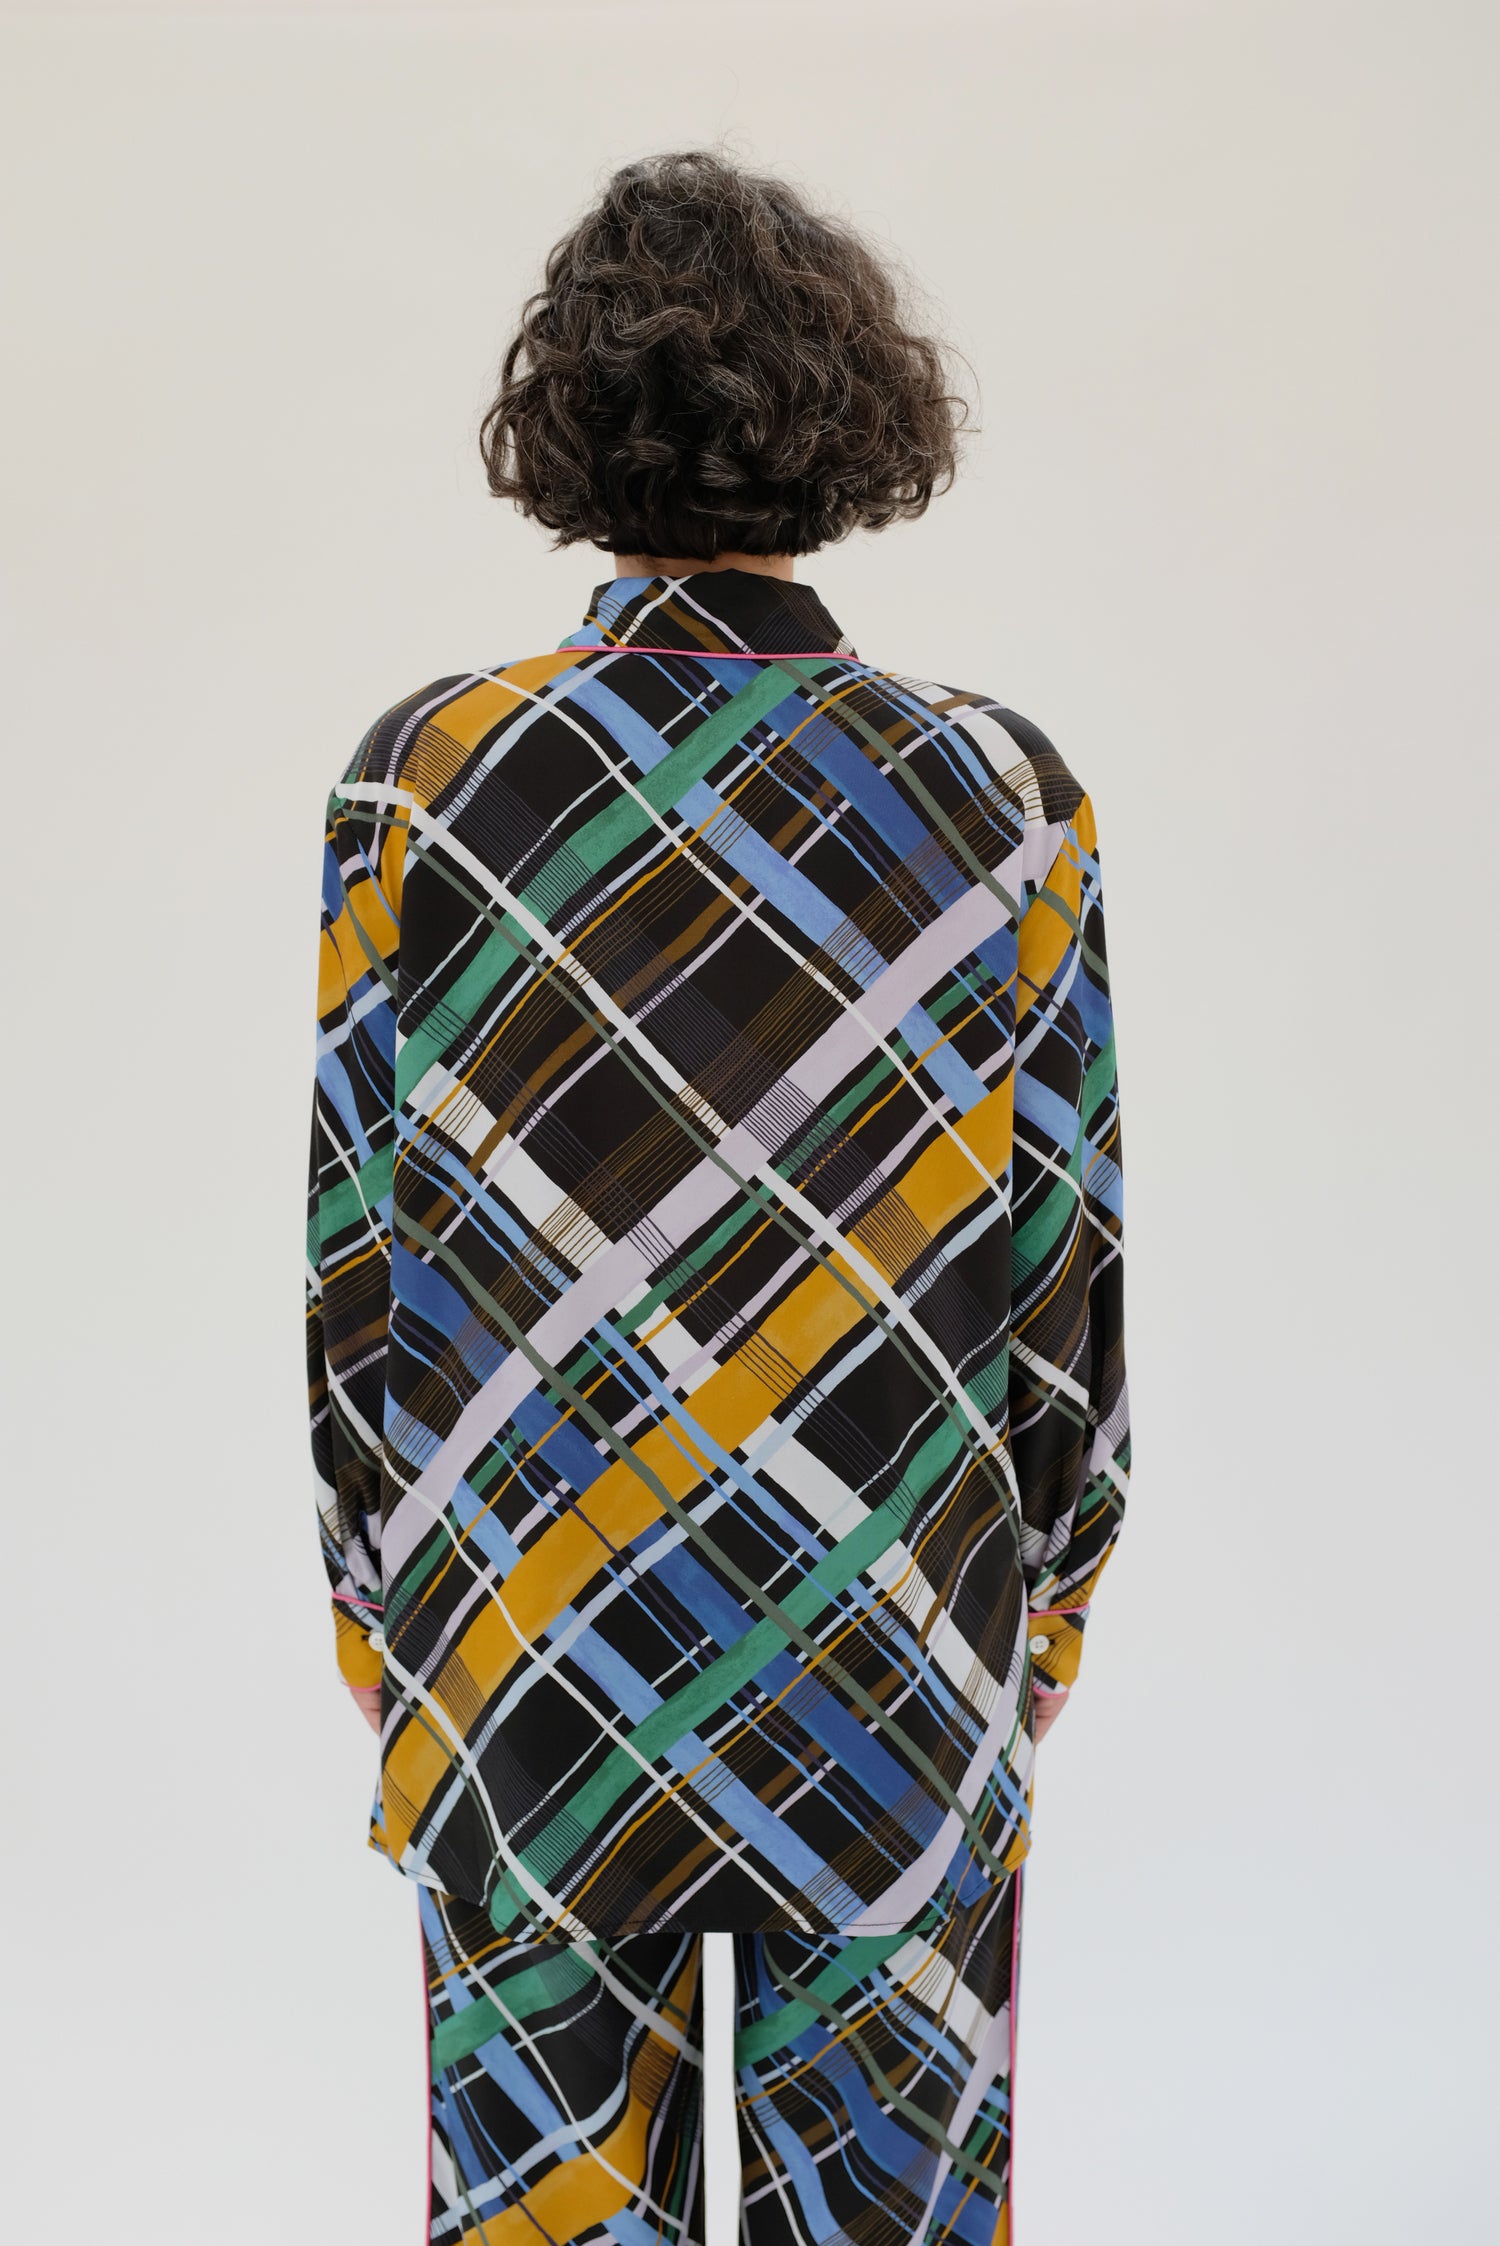 Untitled In Motion Manifest Top Plaid